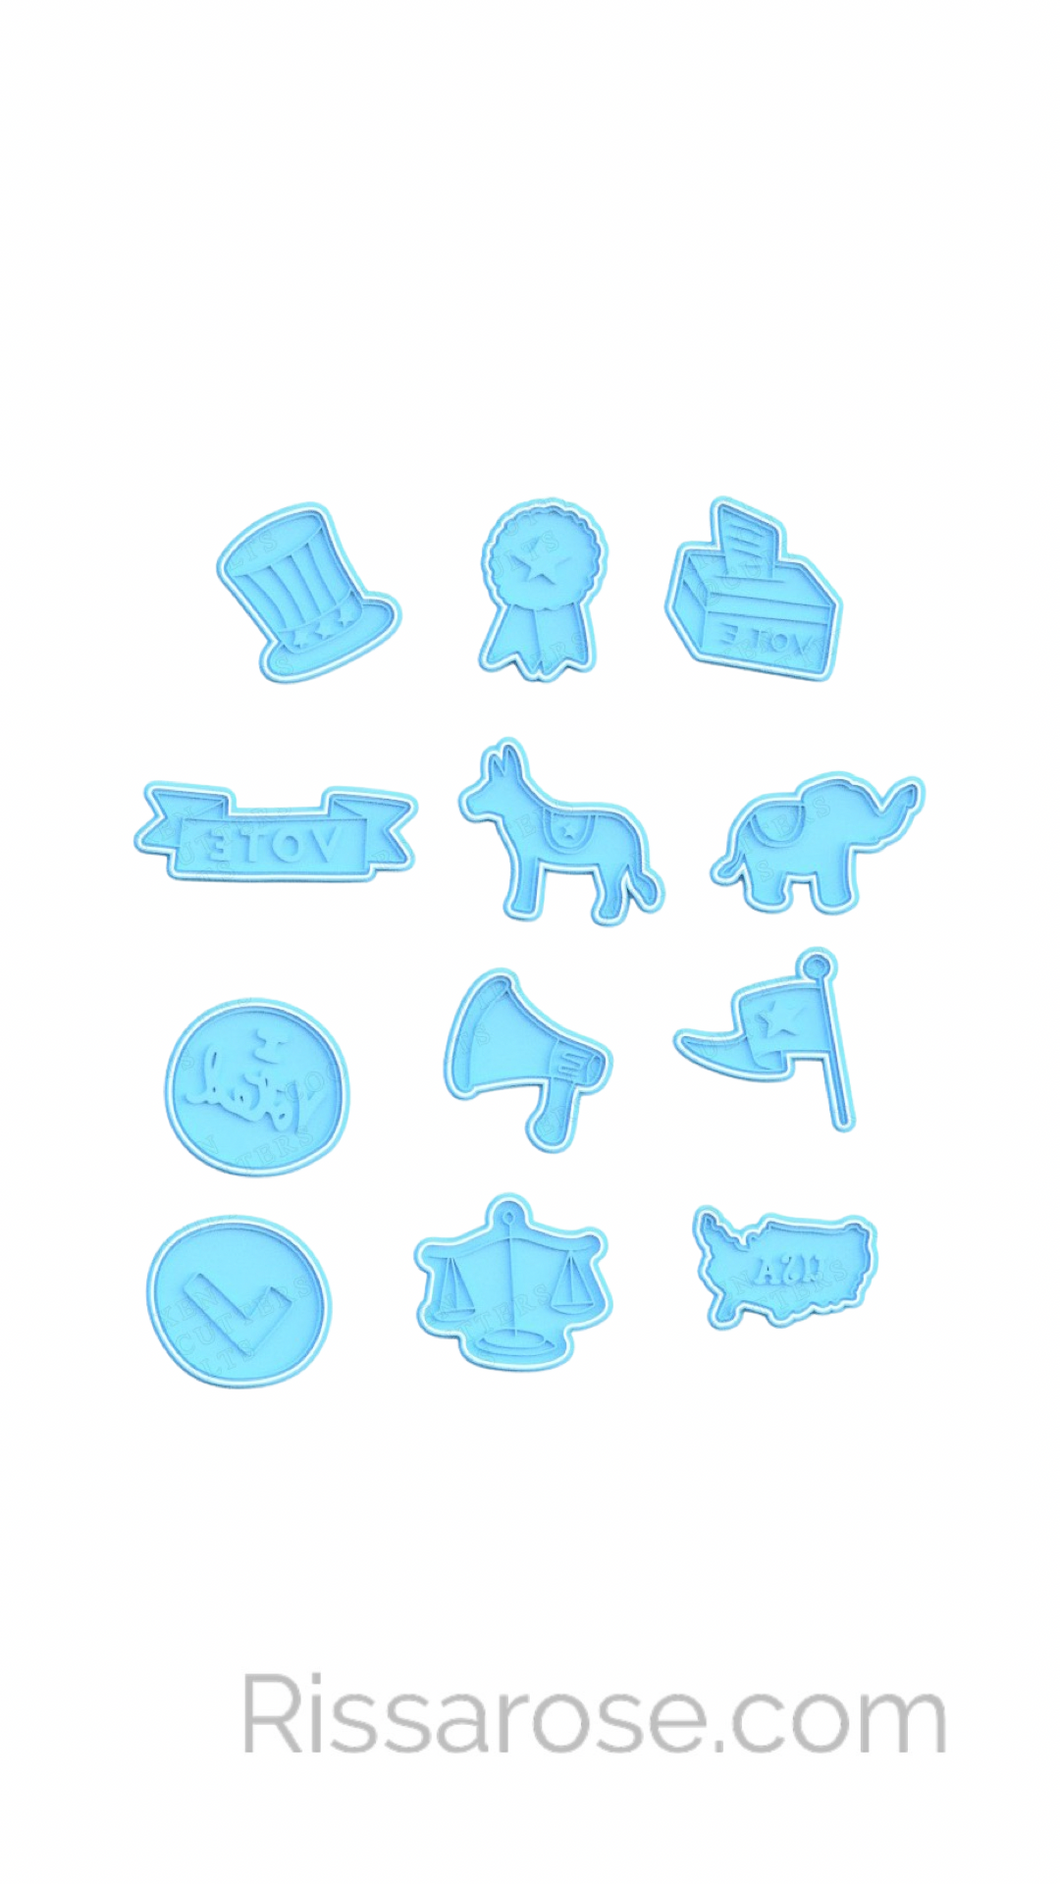 Election Set Cookie Cutter Stamp Hat Pin Ballot Ribbon Dog Elephant Stamp Loudspeaker Flag Check Scale Map